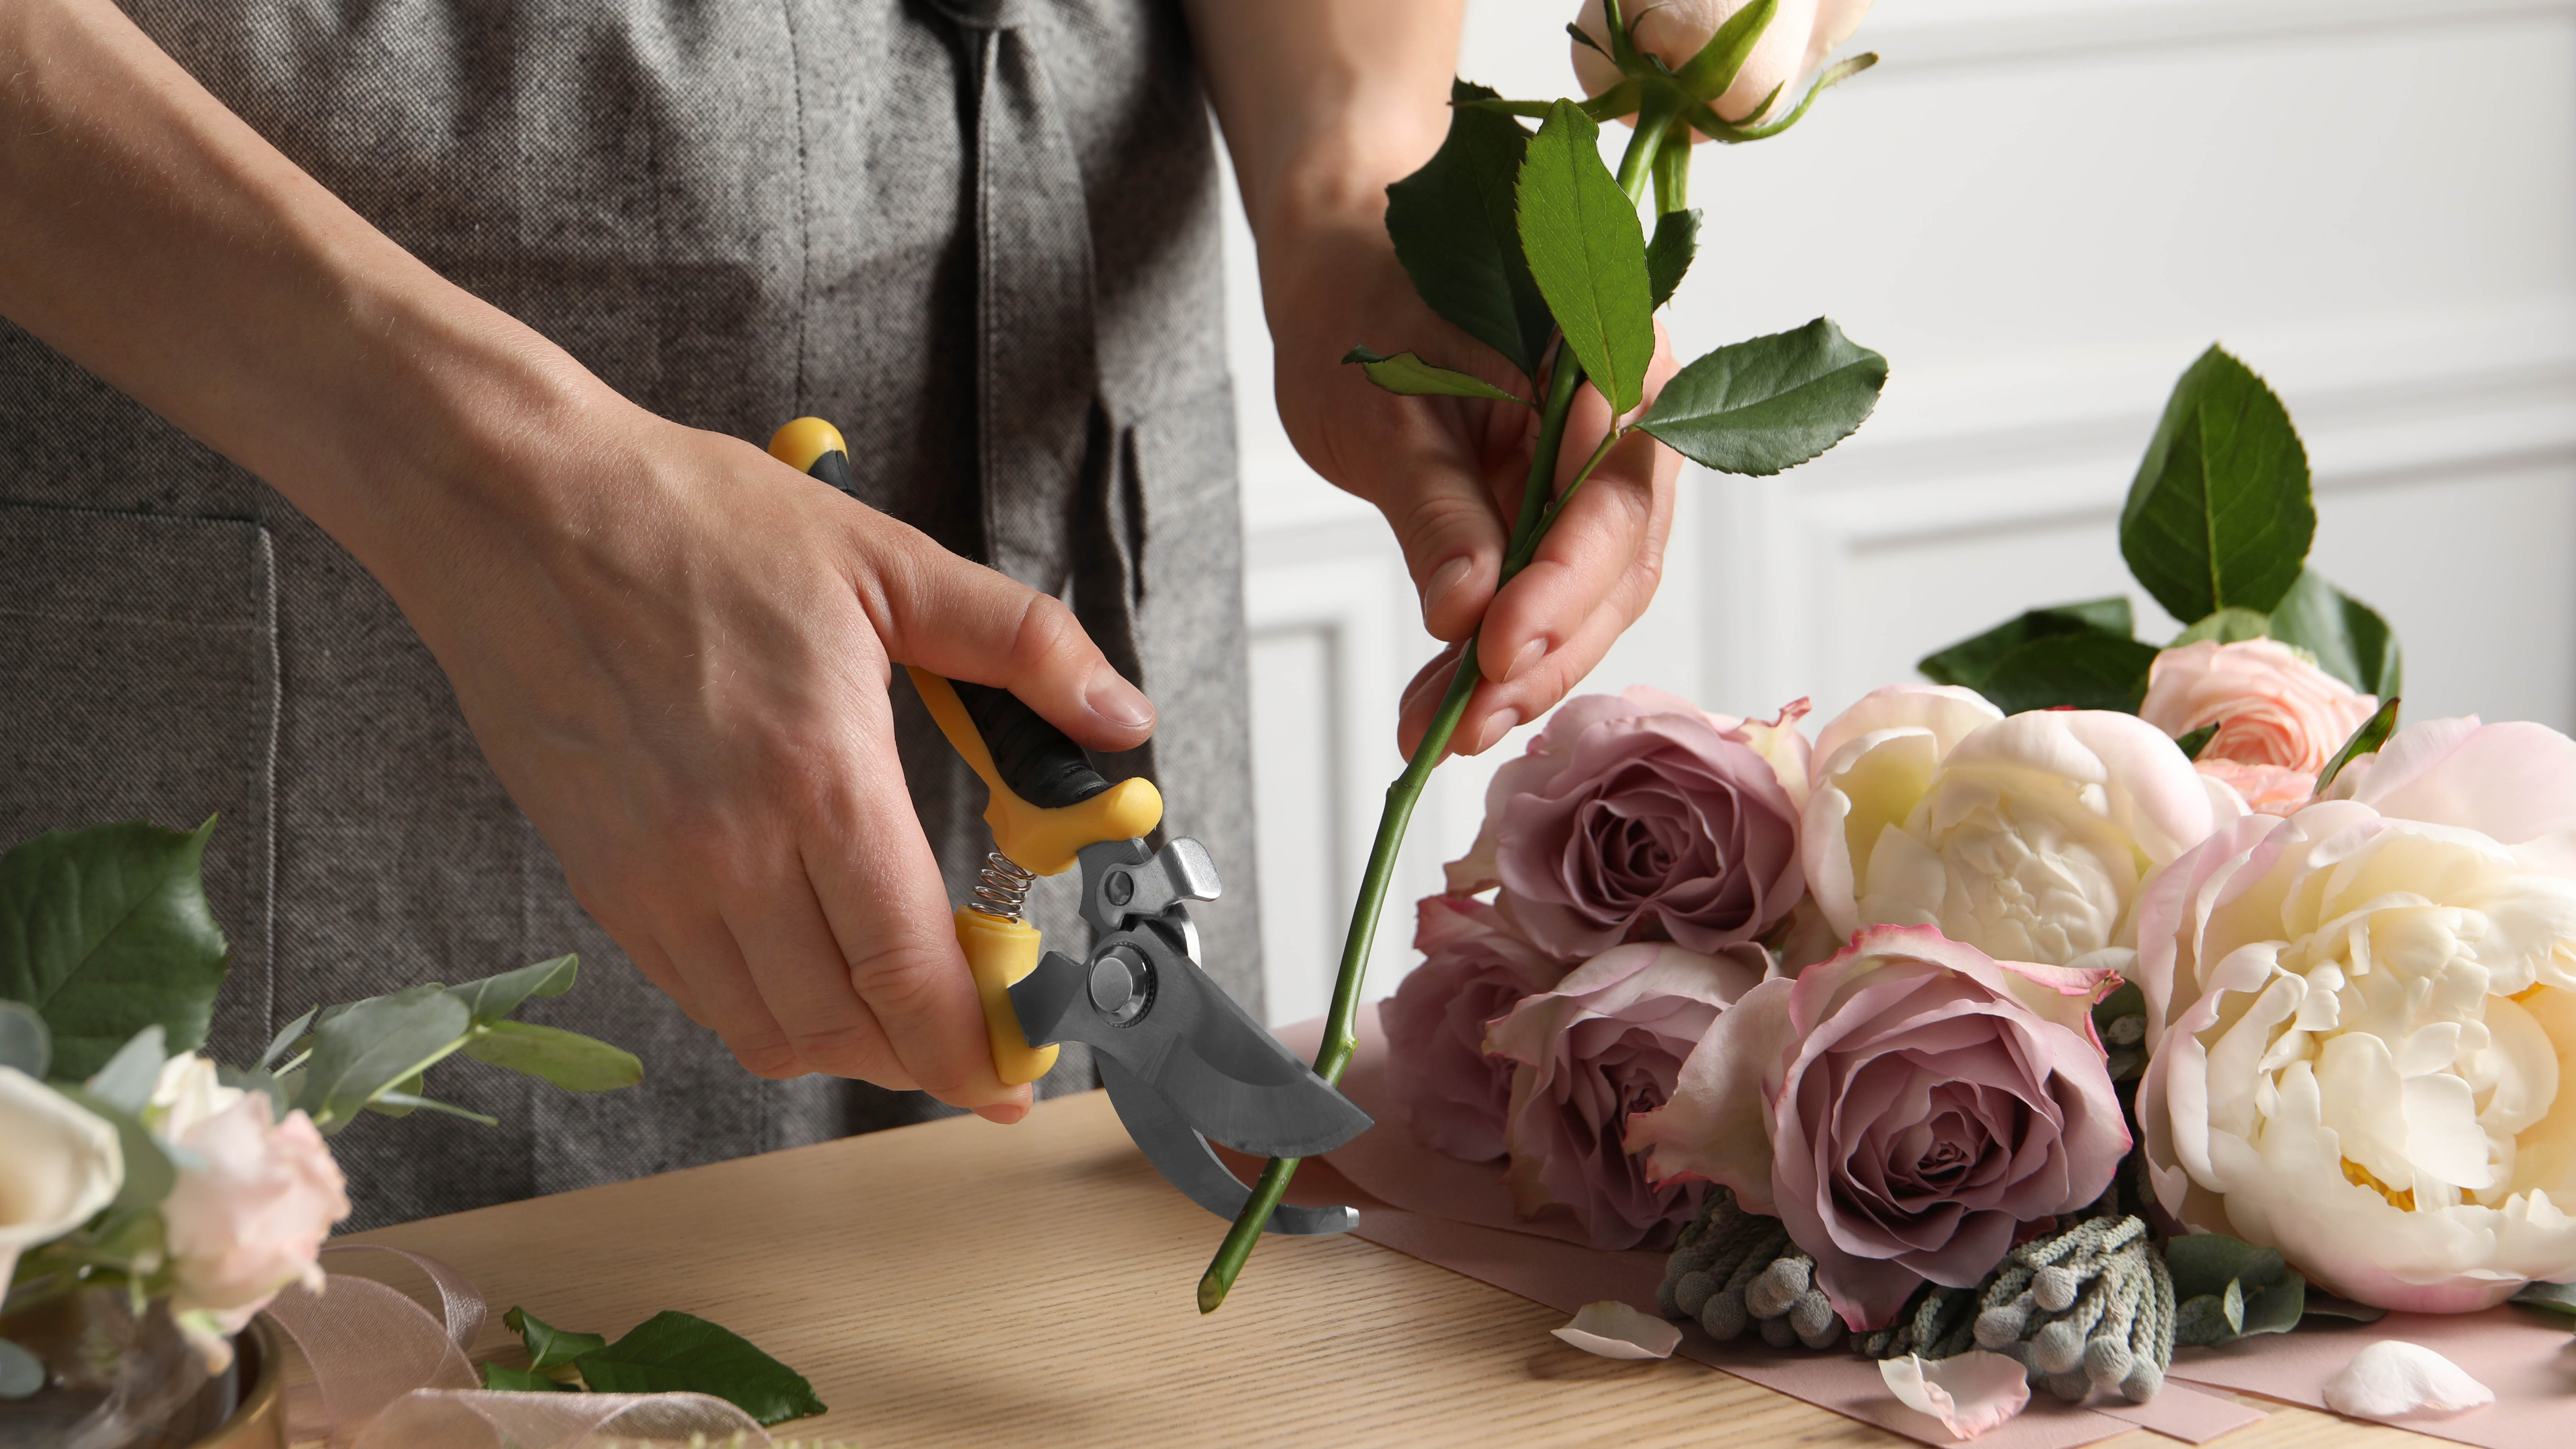 A rose trimmed with pruning shears on the counter next to a bouquet of roses